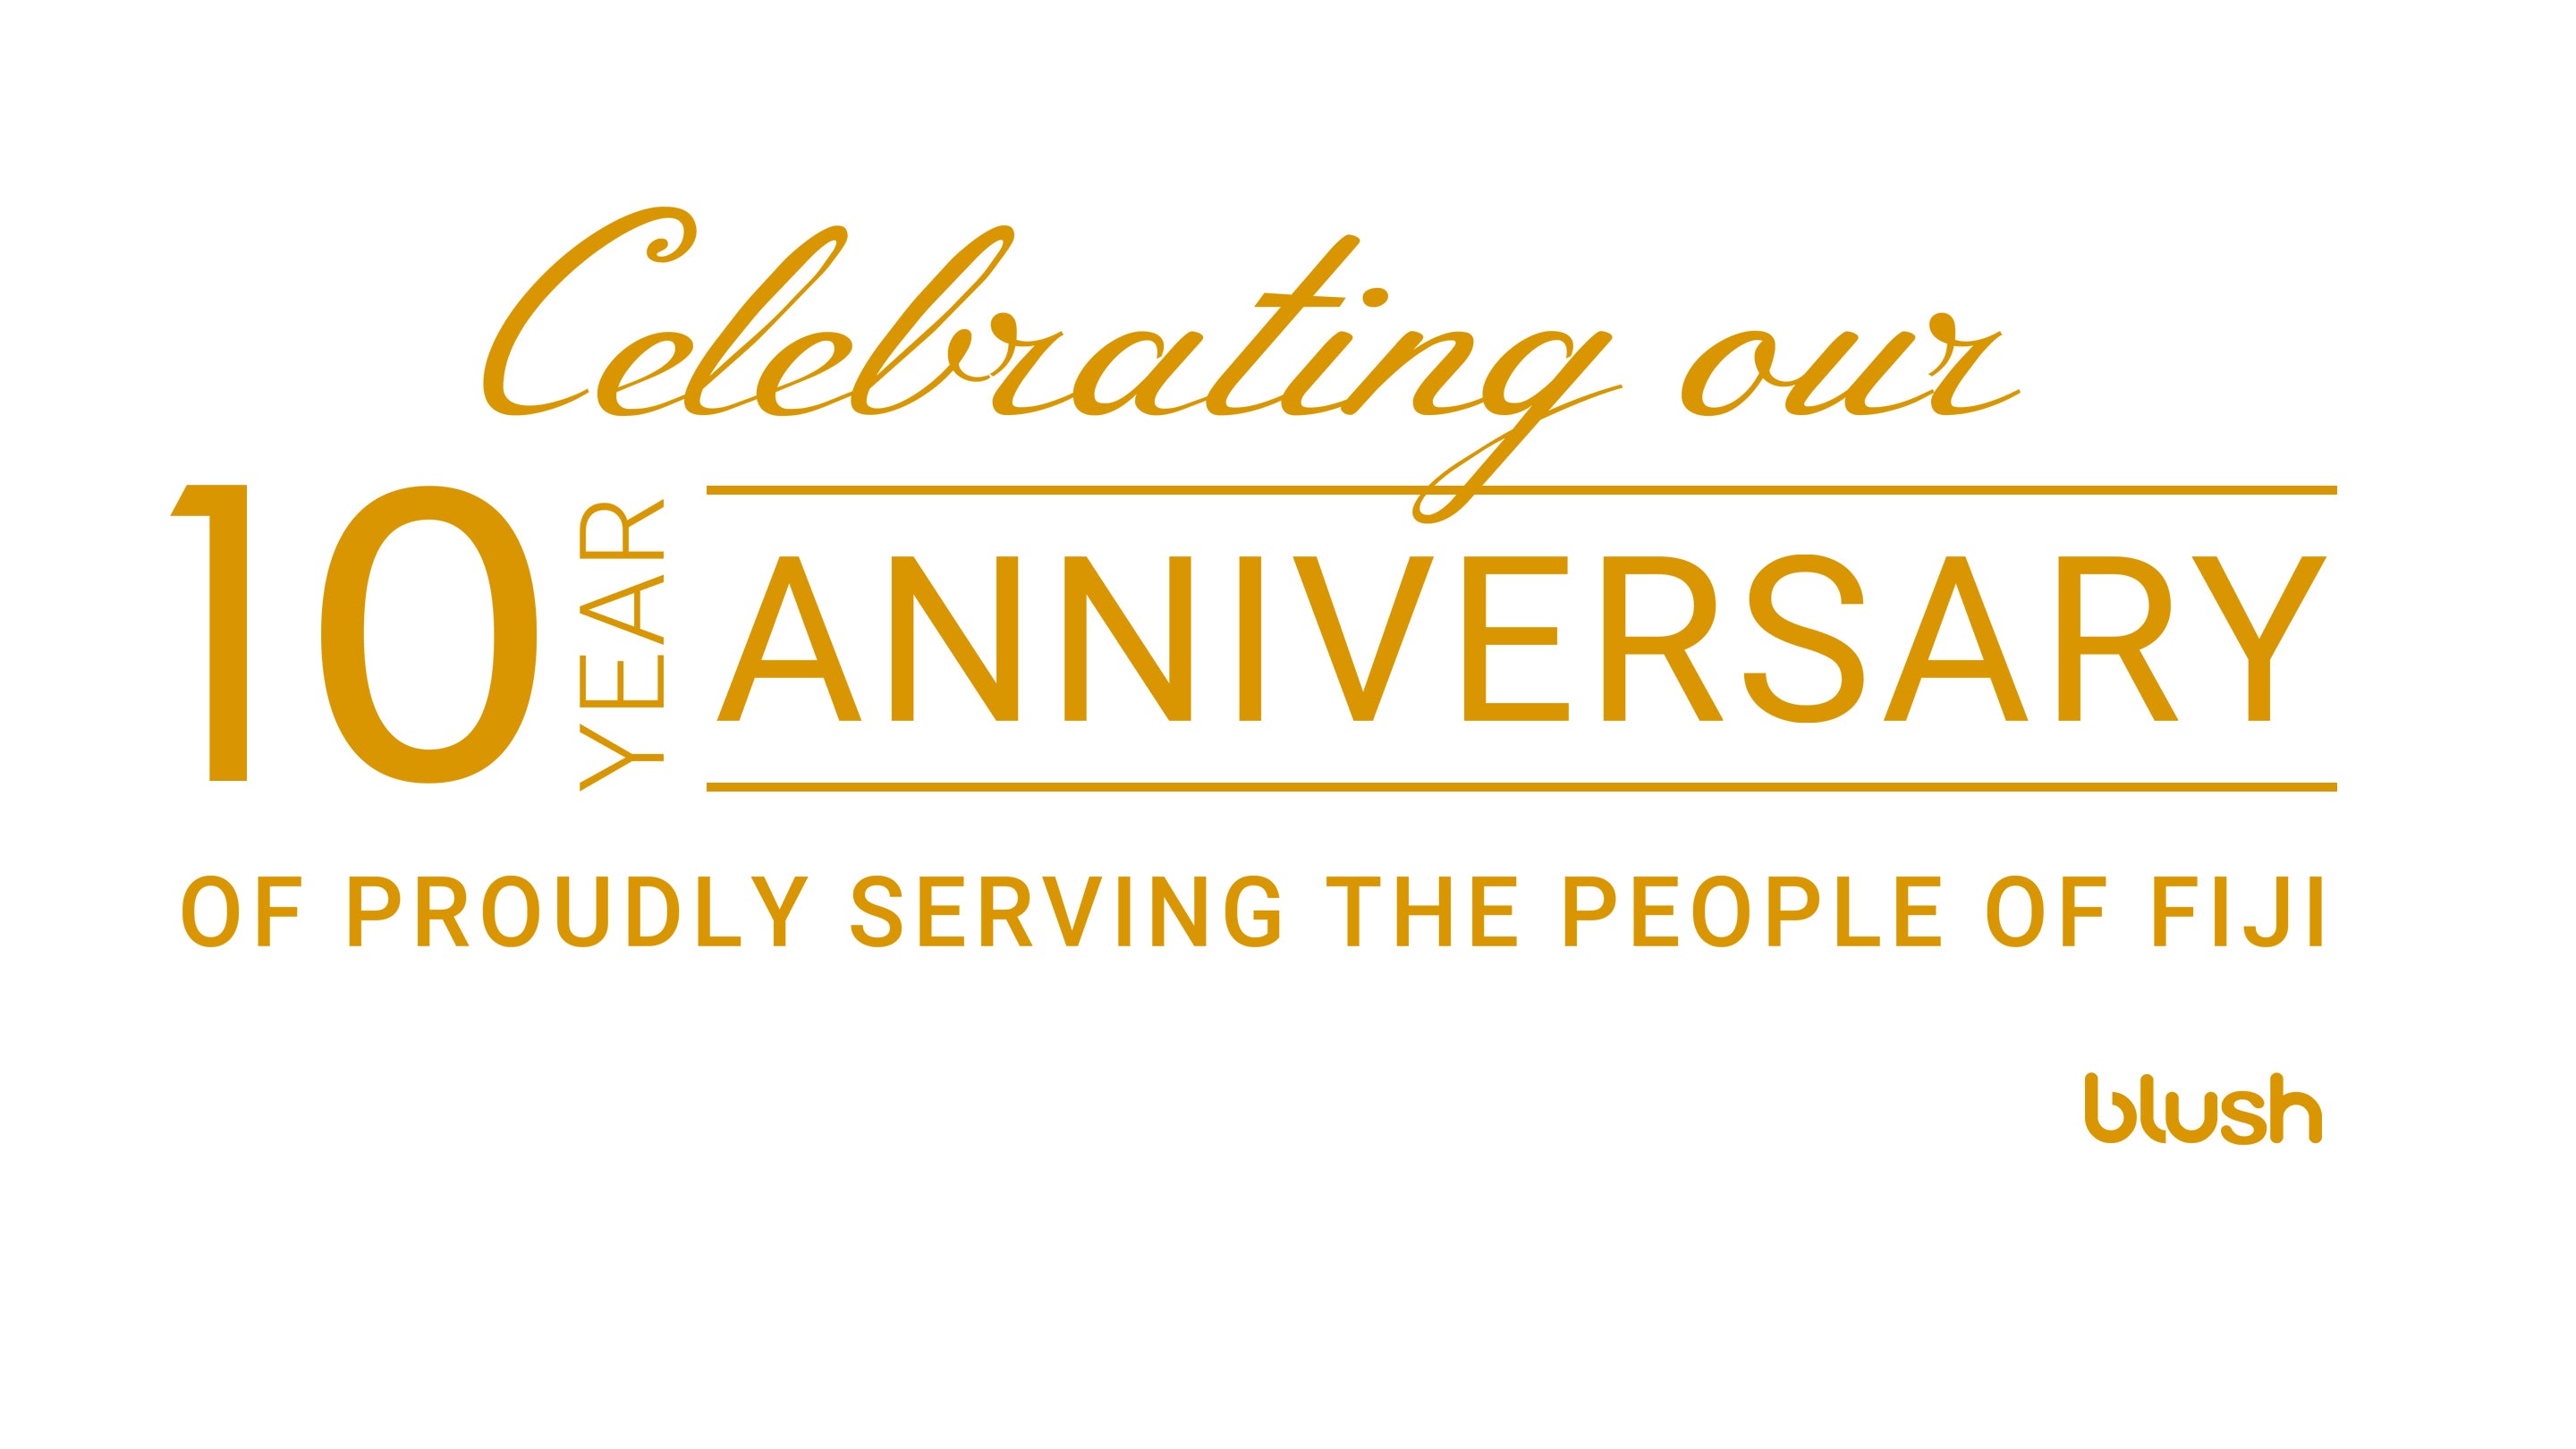 Blush is celebrating 10 years of proudly serving the people of Fiji